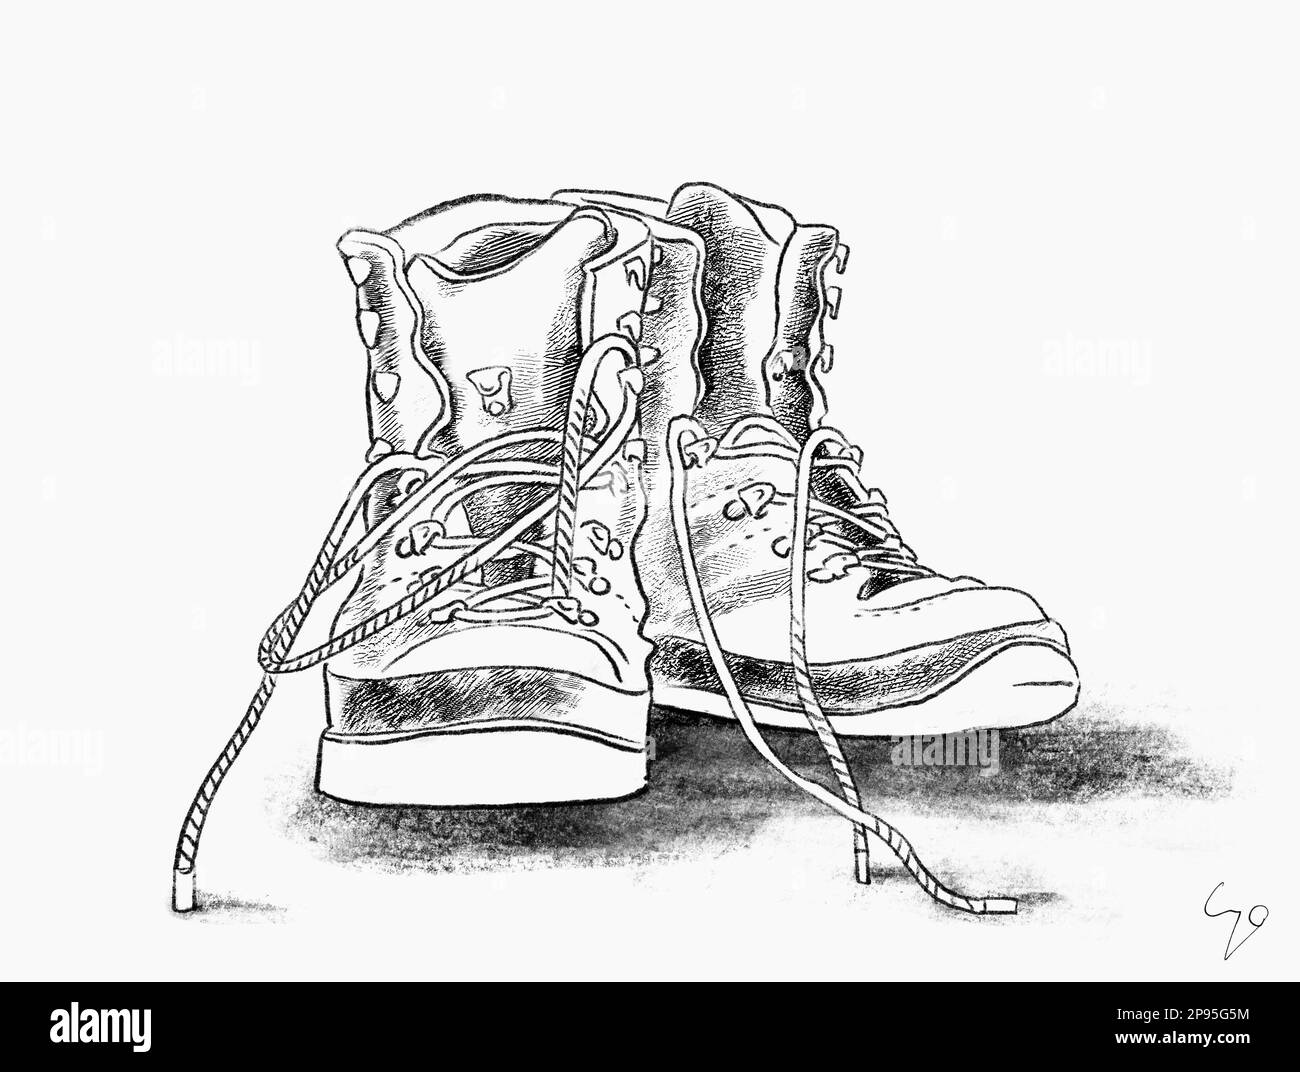 Worn hiking boots as drawing. Illustration Stock Photo